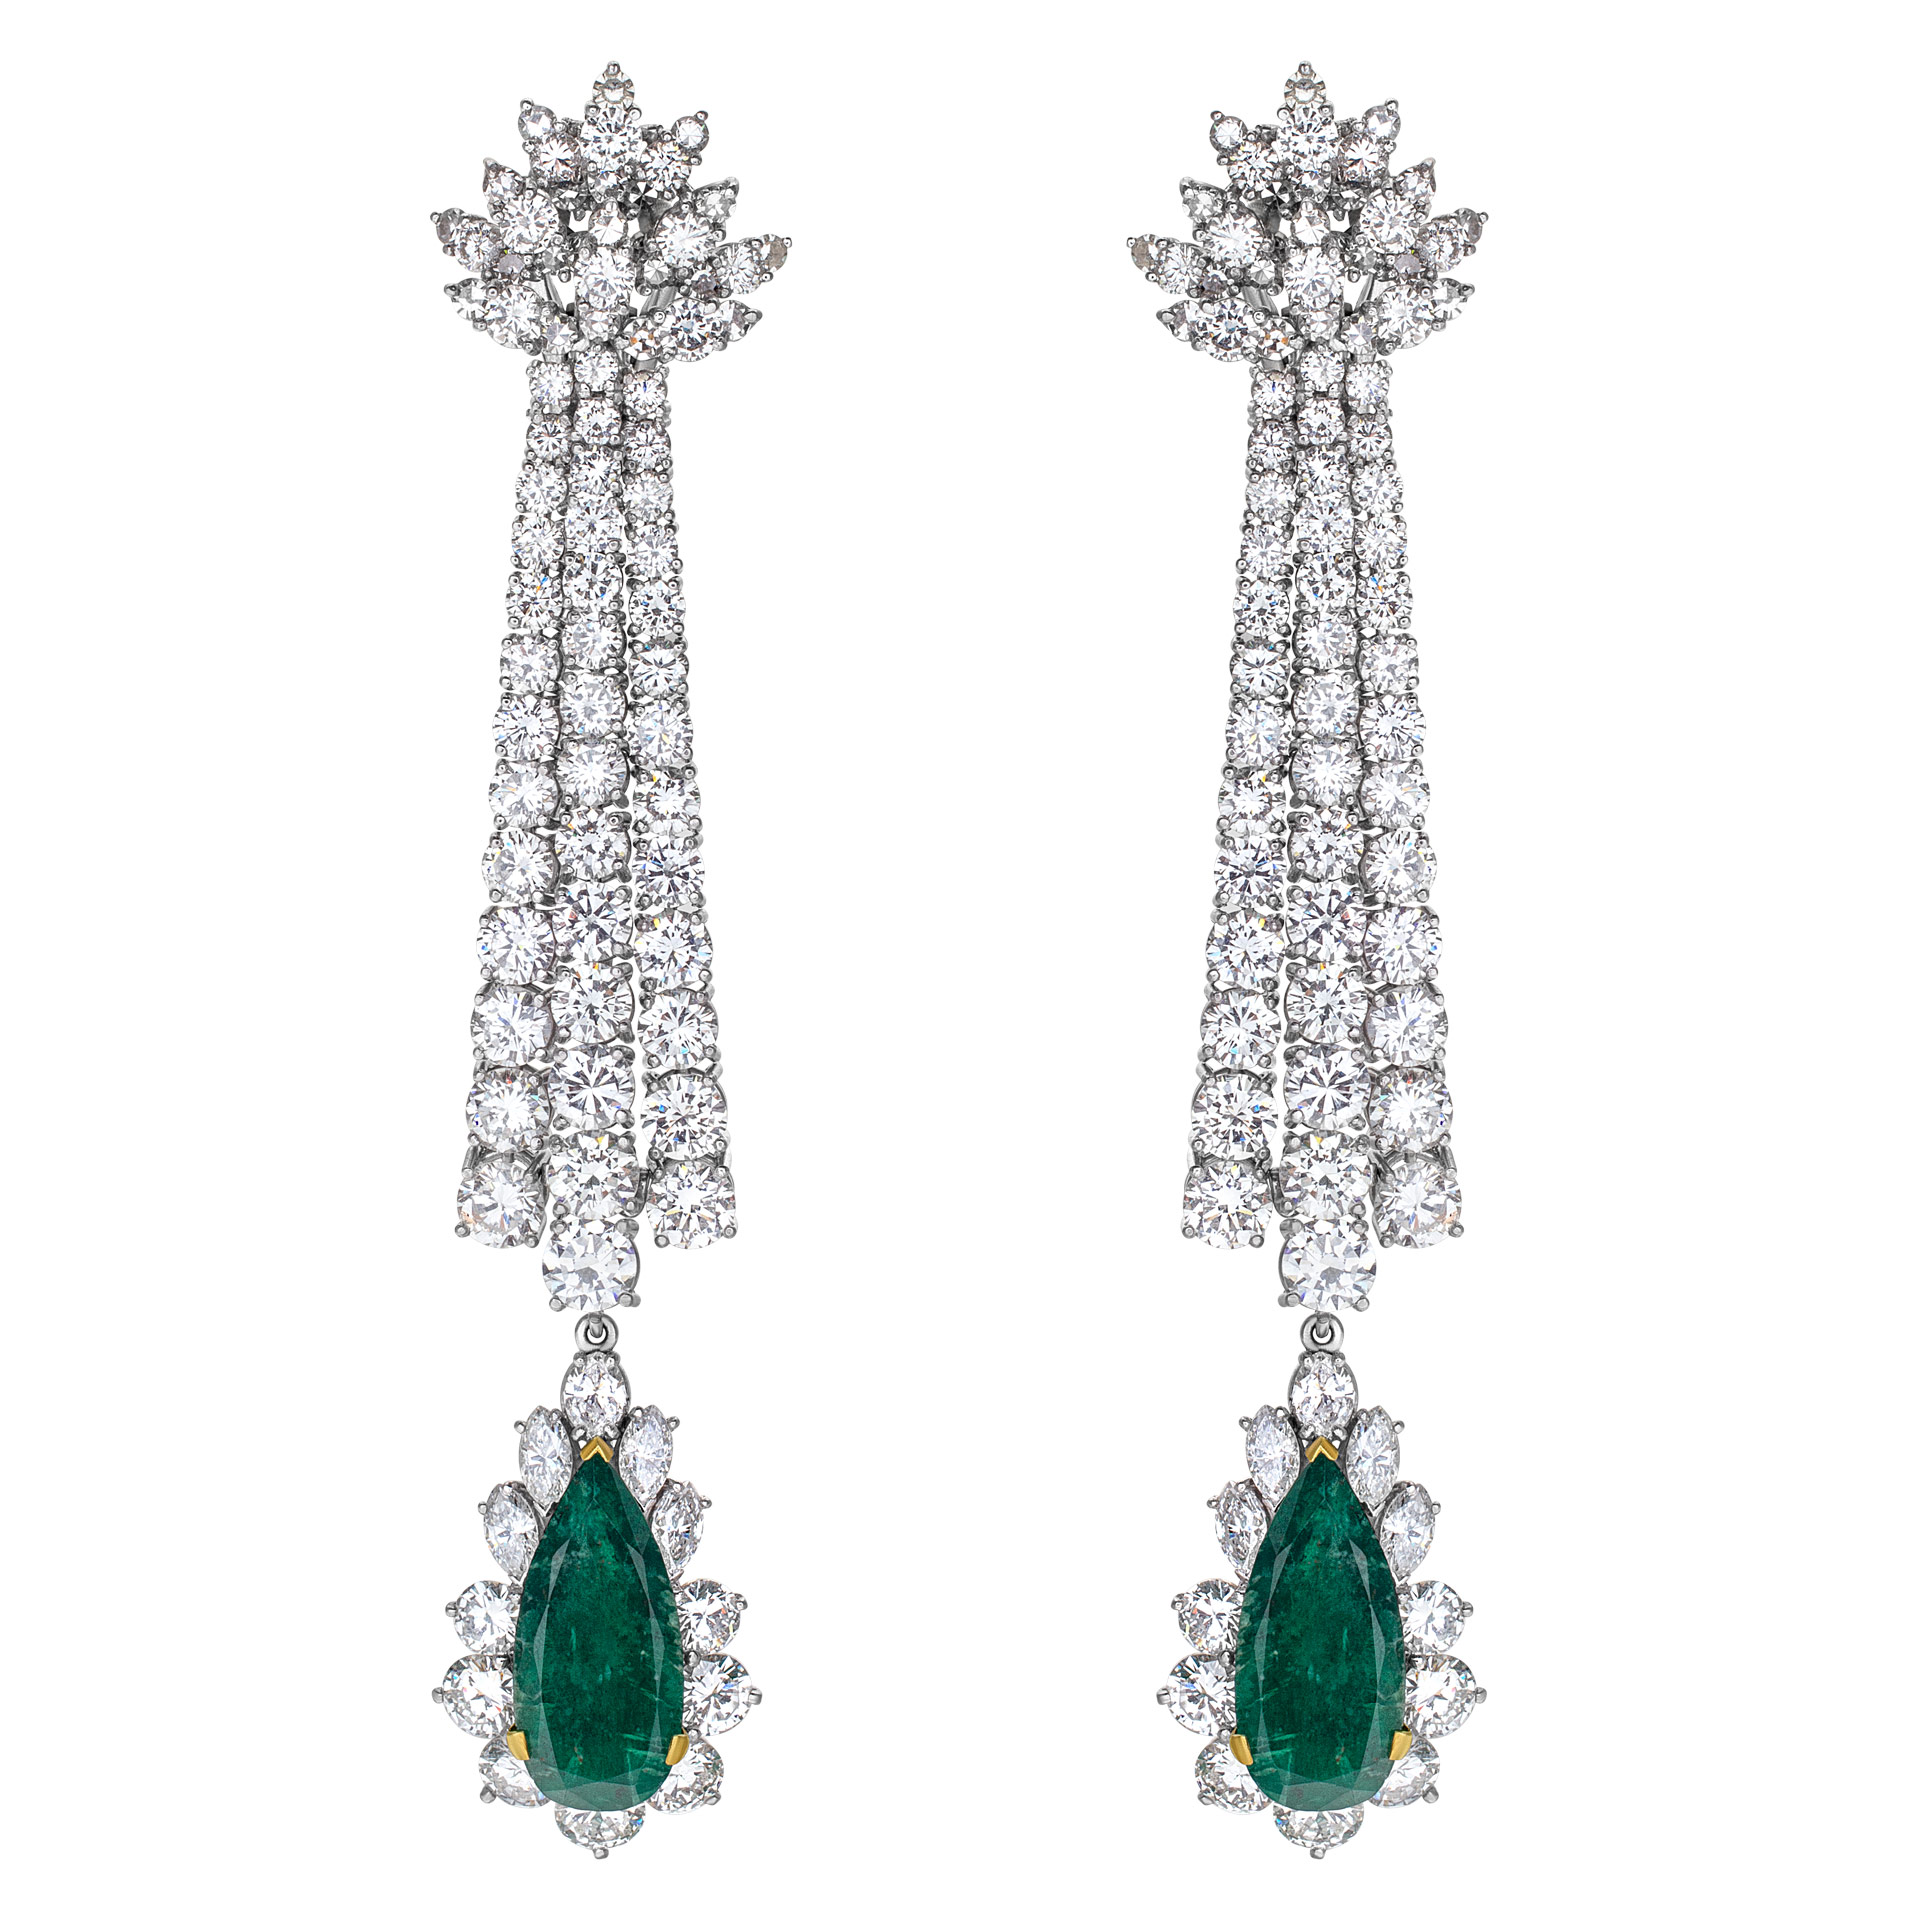 Drop diamond earrings with pear shaped emerald in platinum. 20 carats in diamonds, 9 carats in emeralds image 1